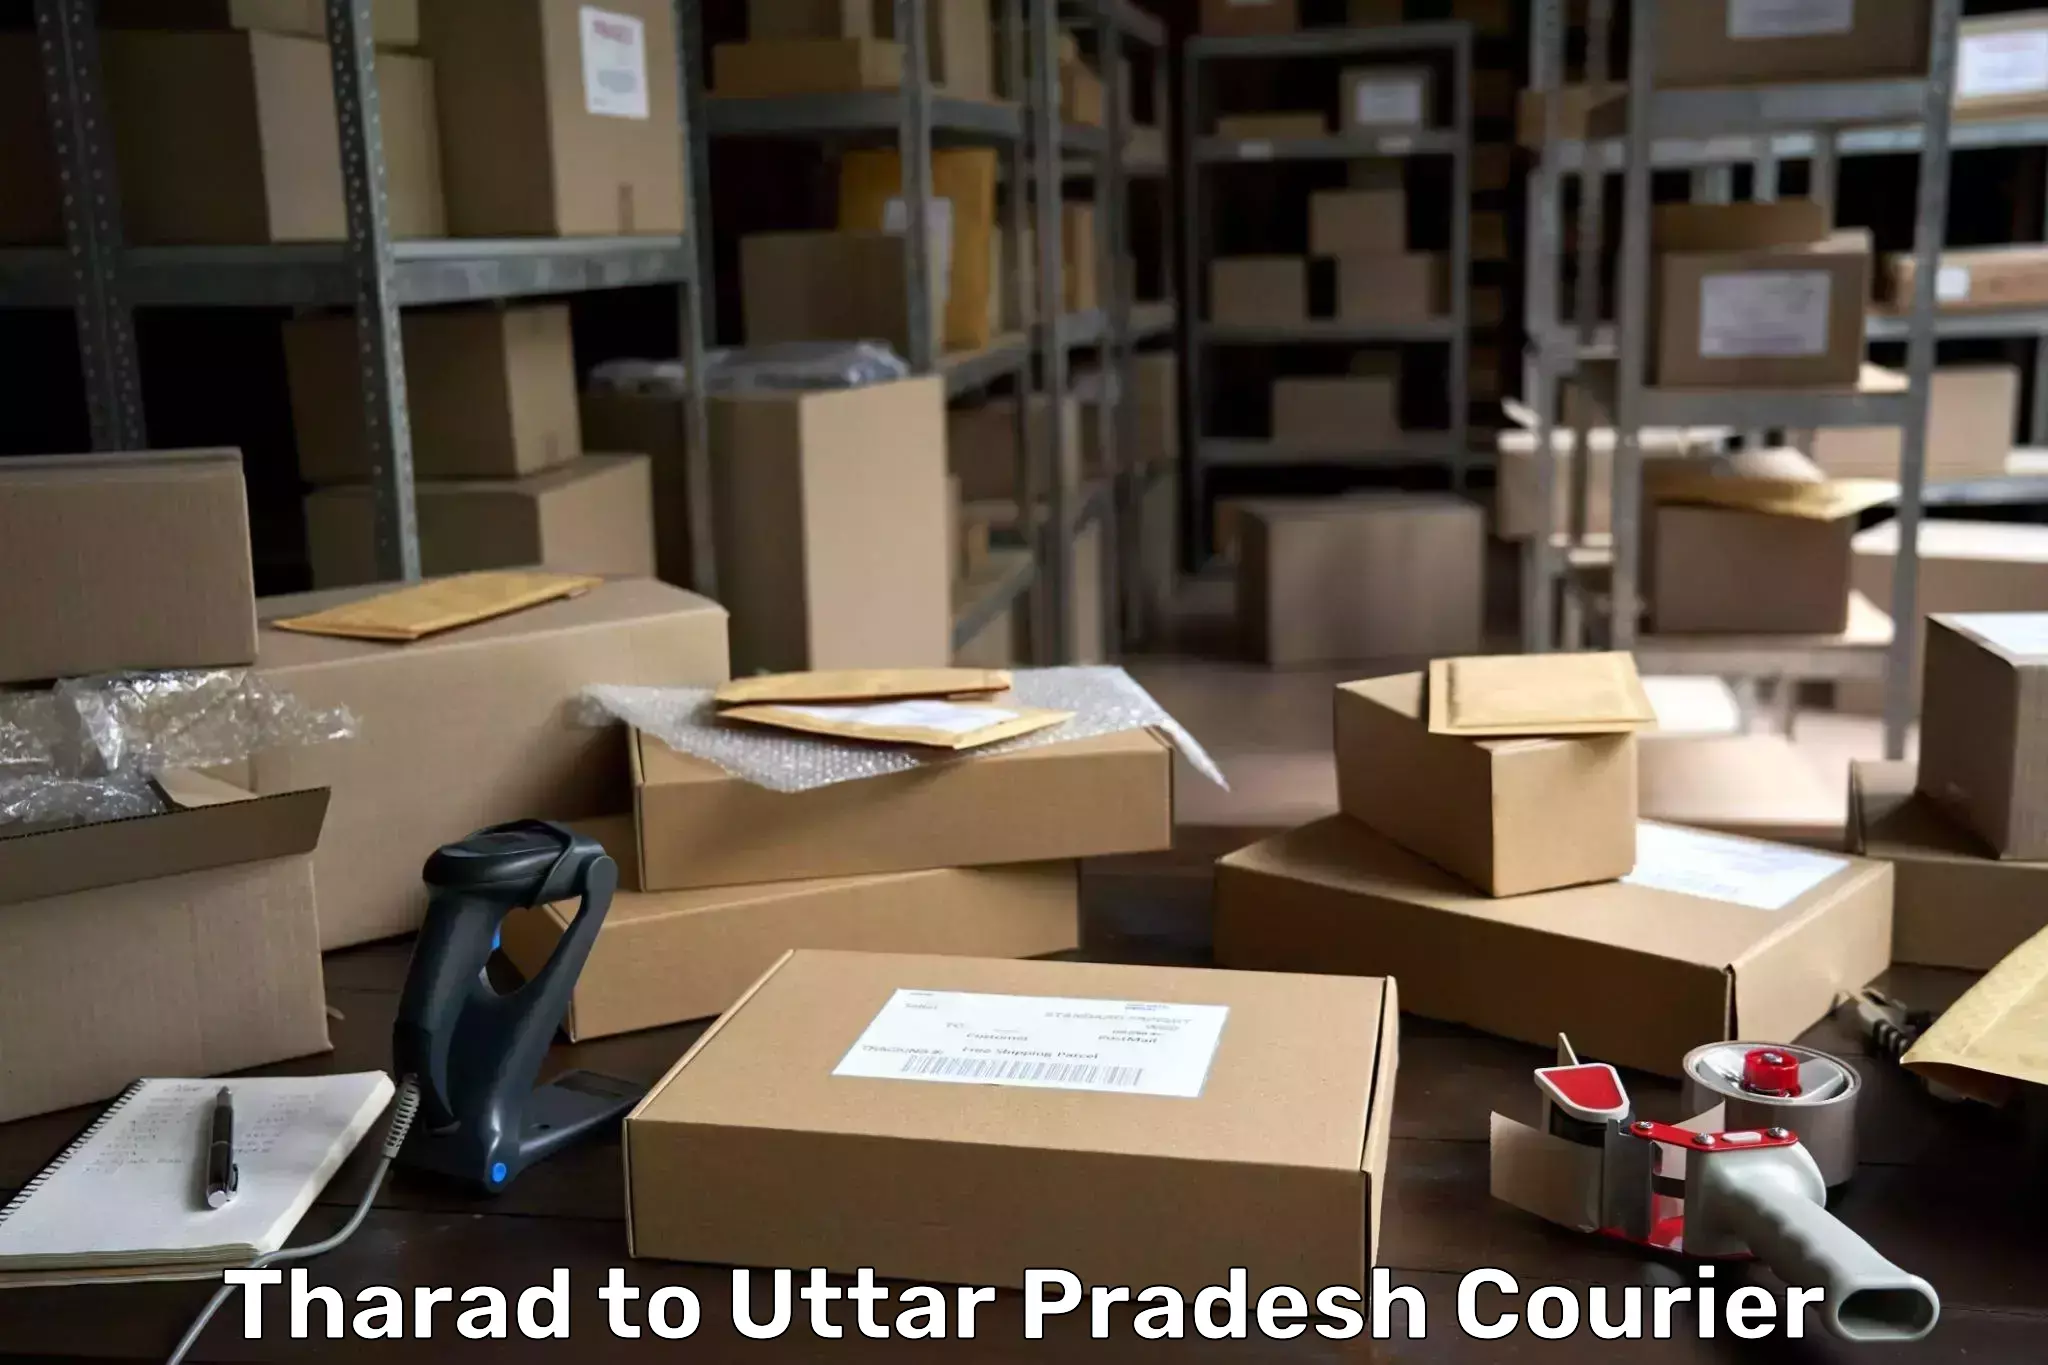 Business delivery service Tharad to Uttar Pradesh